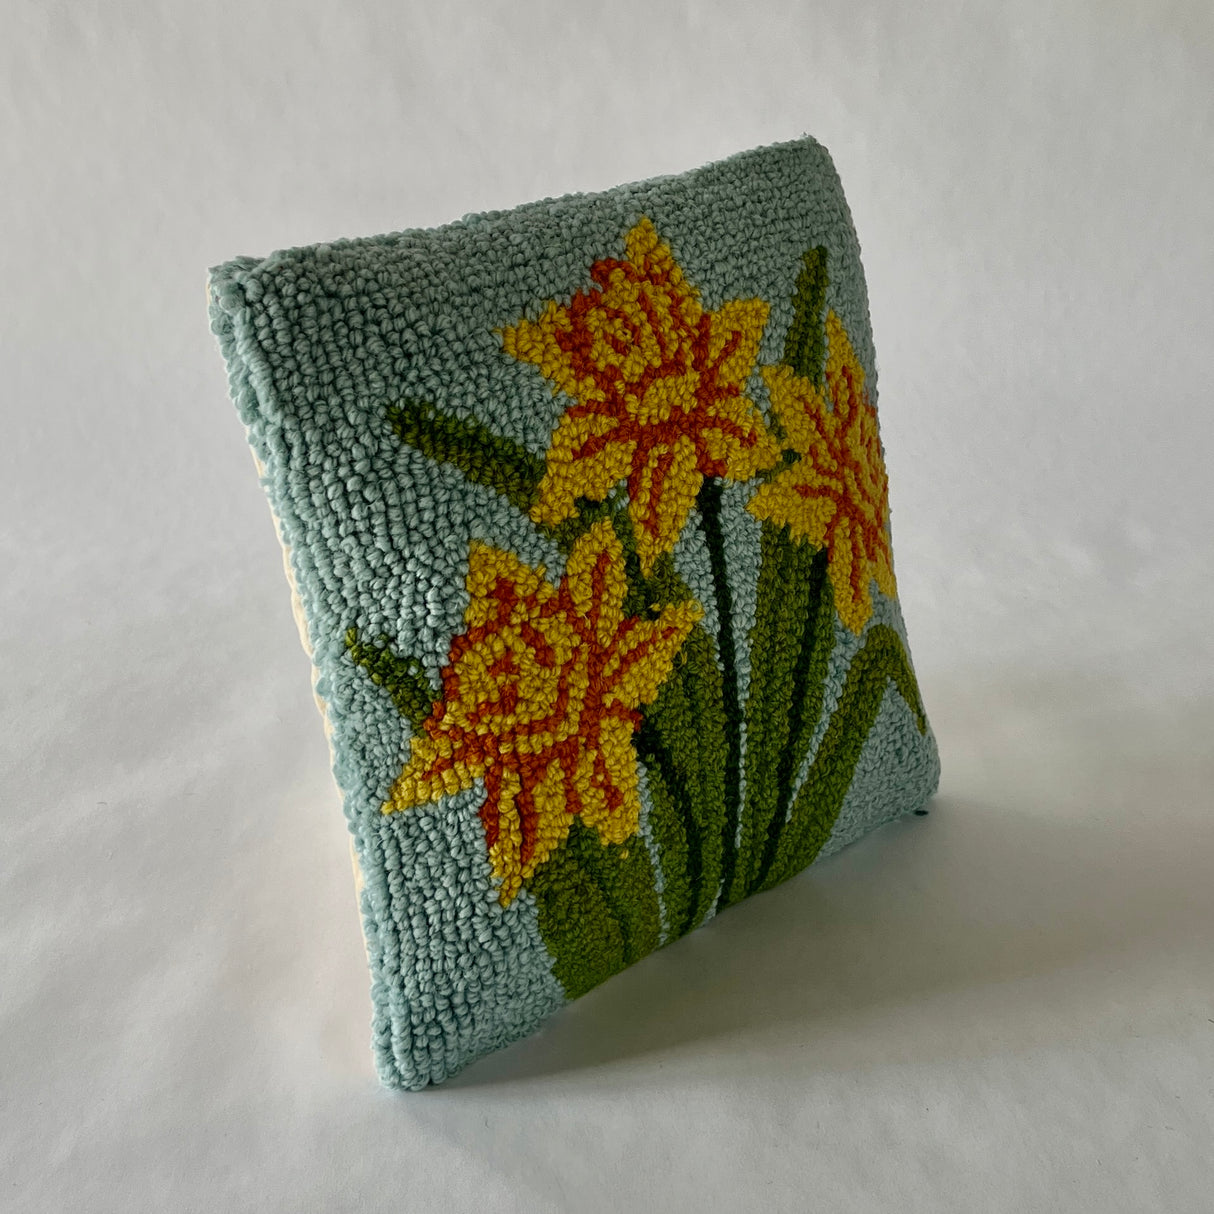 Daffodil Hooked-Wool 10" Square Pillow